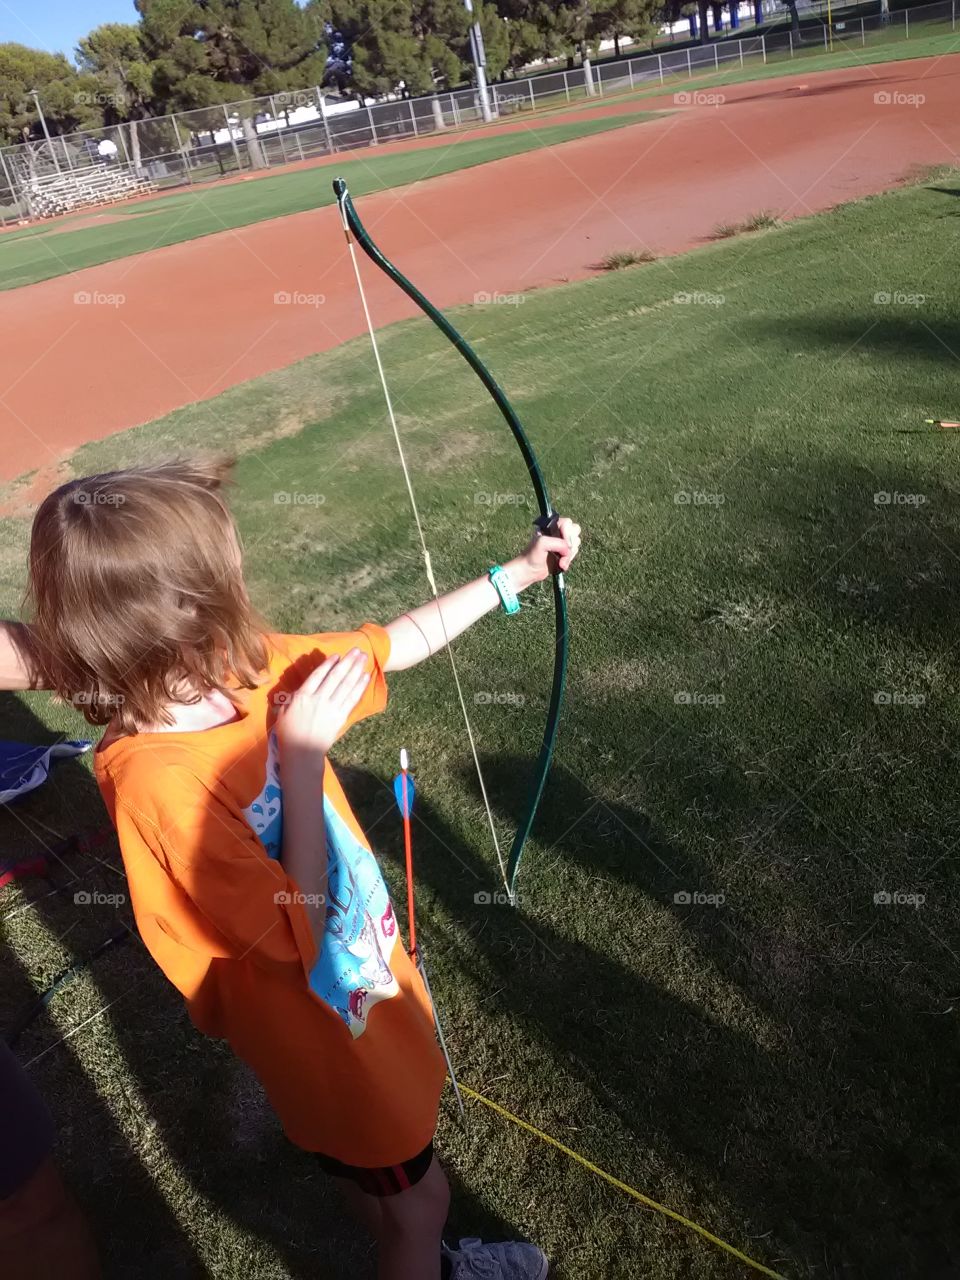 my daughter at day camp 2019 getting down learning the archery.